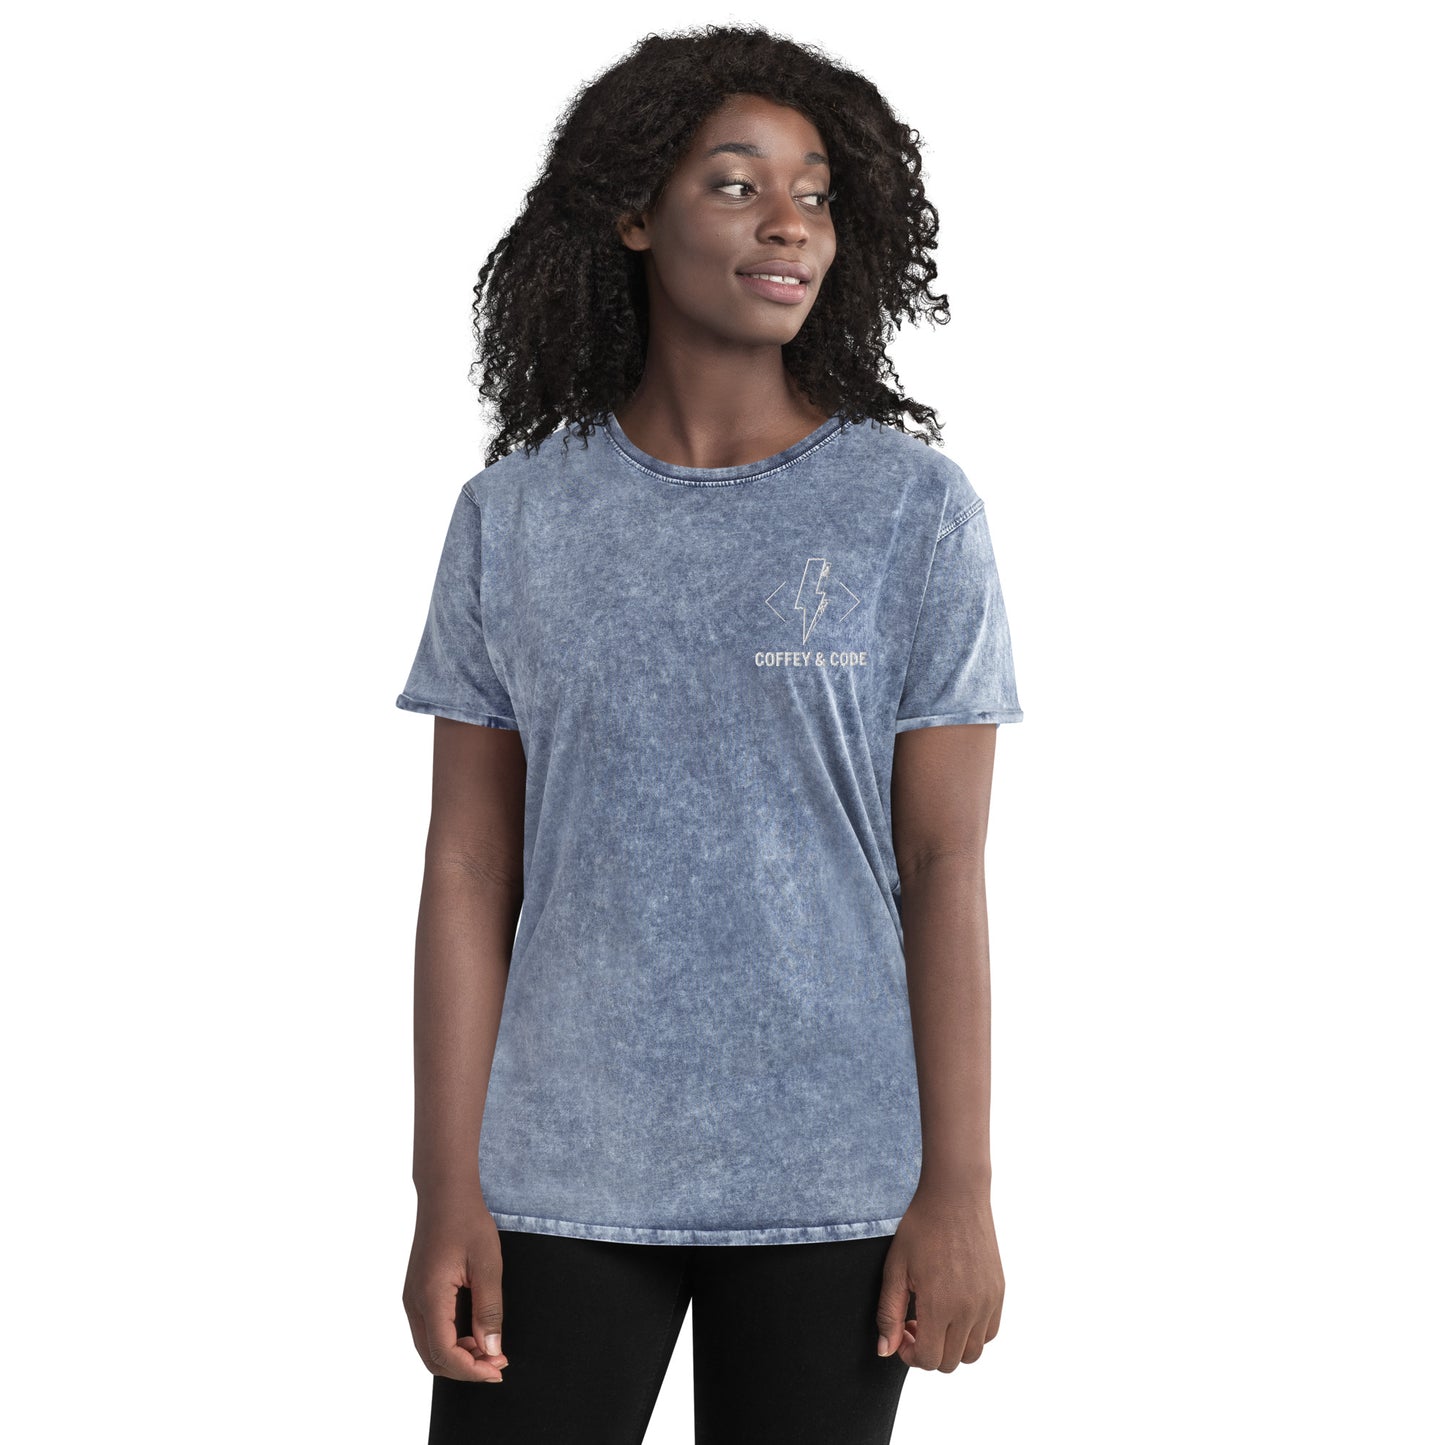 Coffey & Code Embroidered Distressed T-Shirt